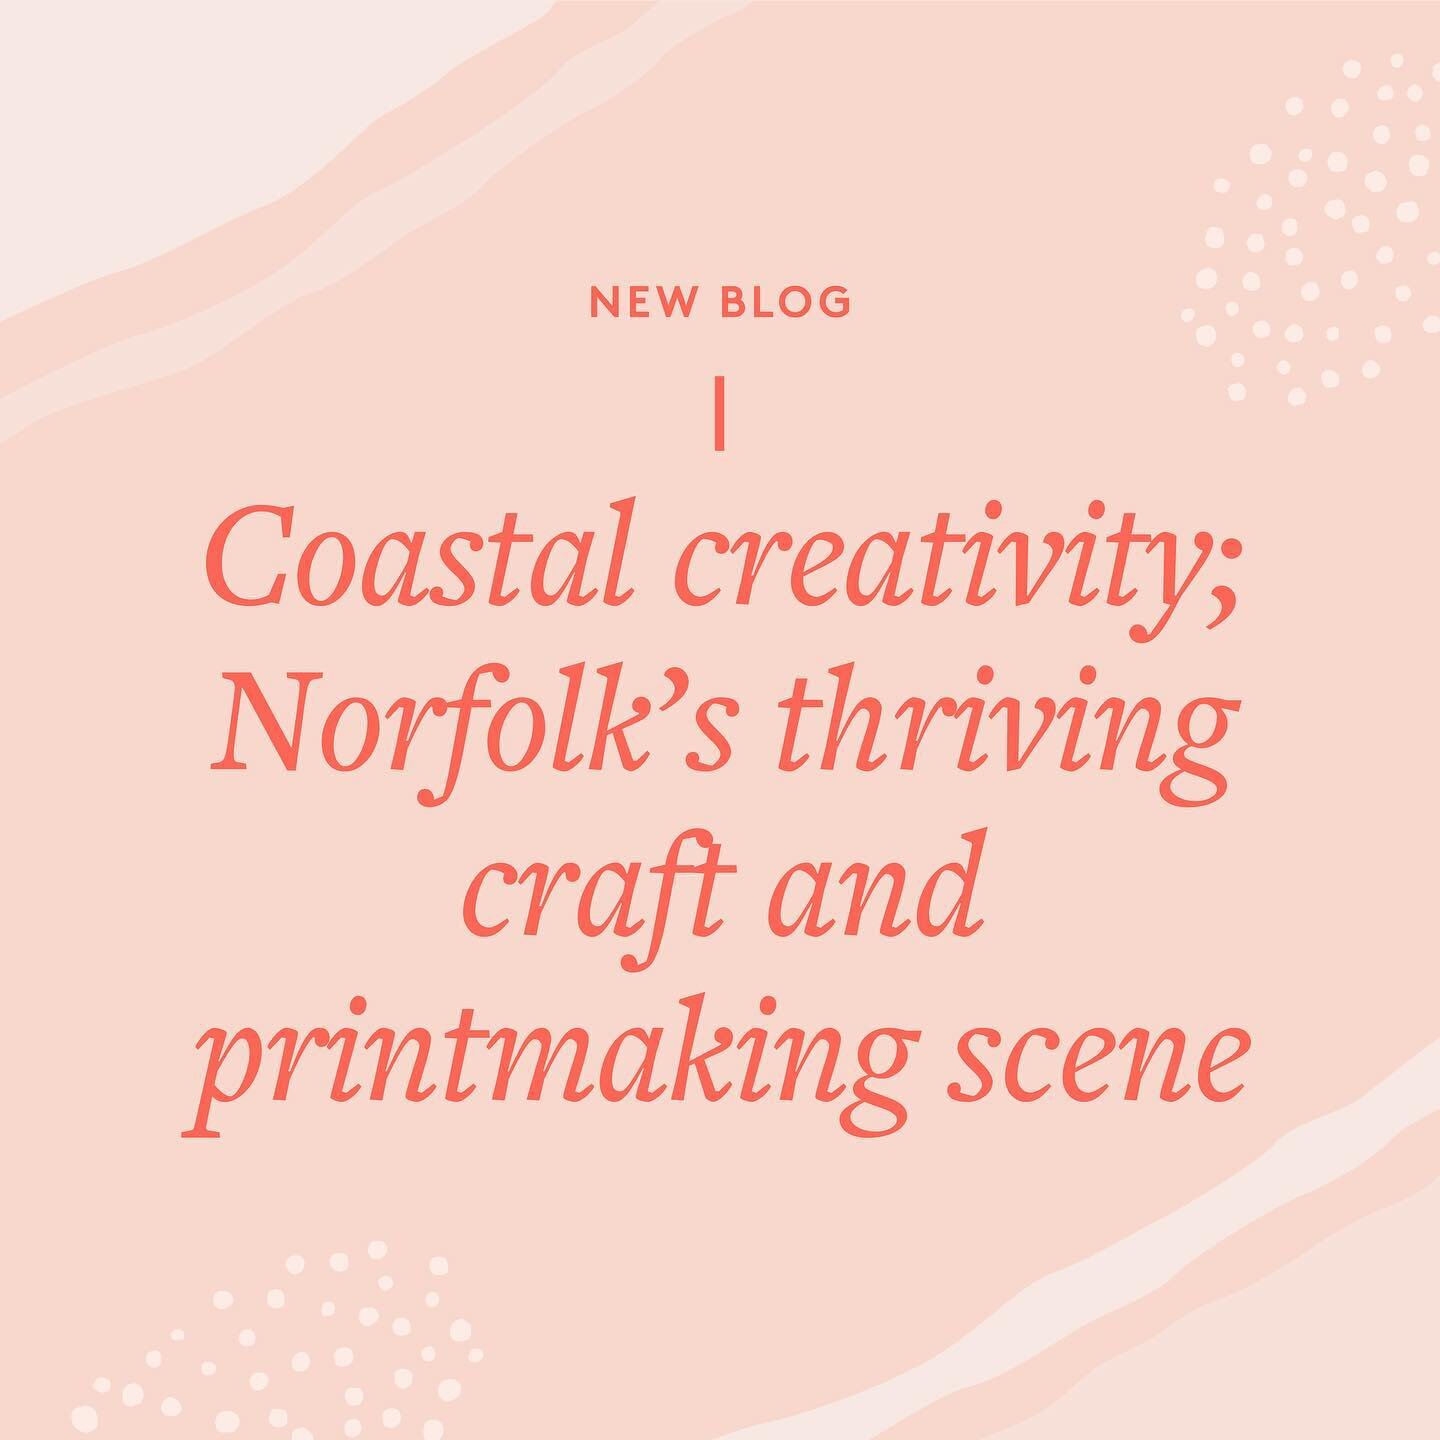 New blog post is up 📖📍 (link in my bio above)

Last week I was on holiday on the Norfolk coast and there was no shortage of creative inspiration within the local art galleries and independent shops, where I discovered many new Norfolk-based printma